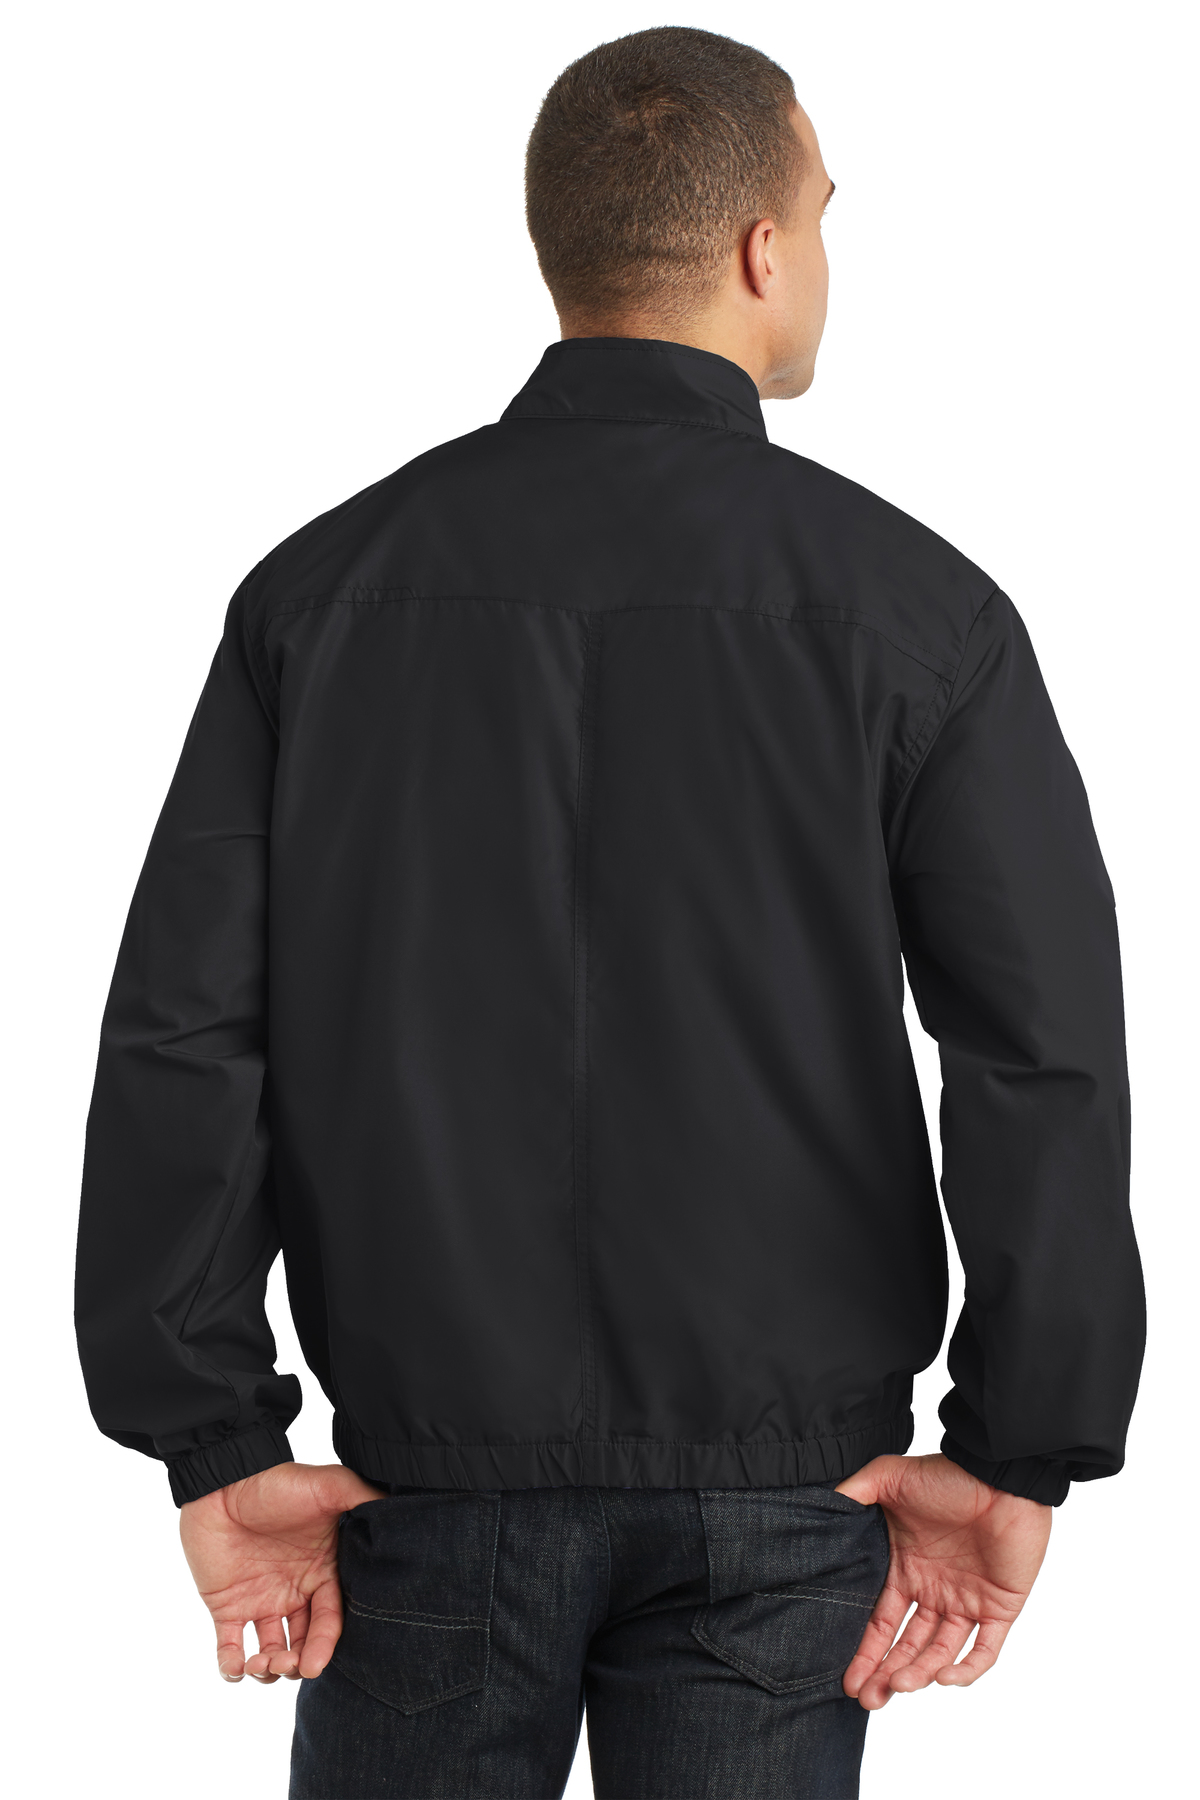 Port Authority® Essential Jacket | Corporate Jackets | Outerwear | SanMar